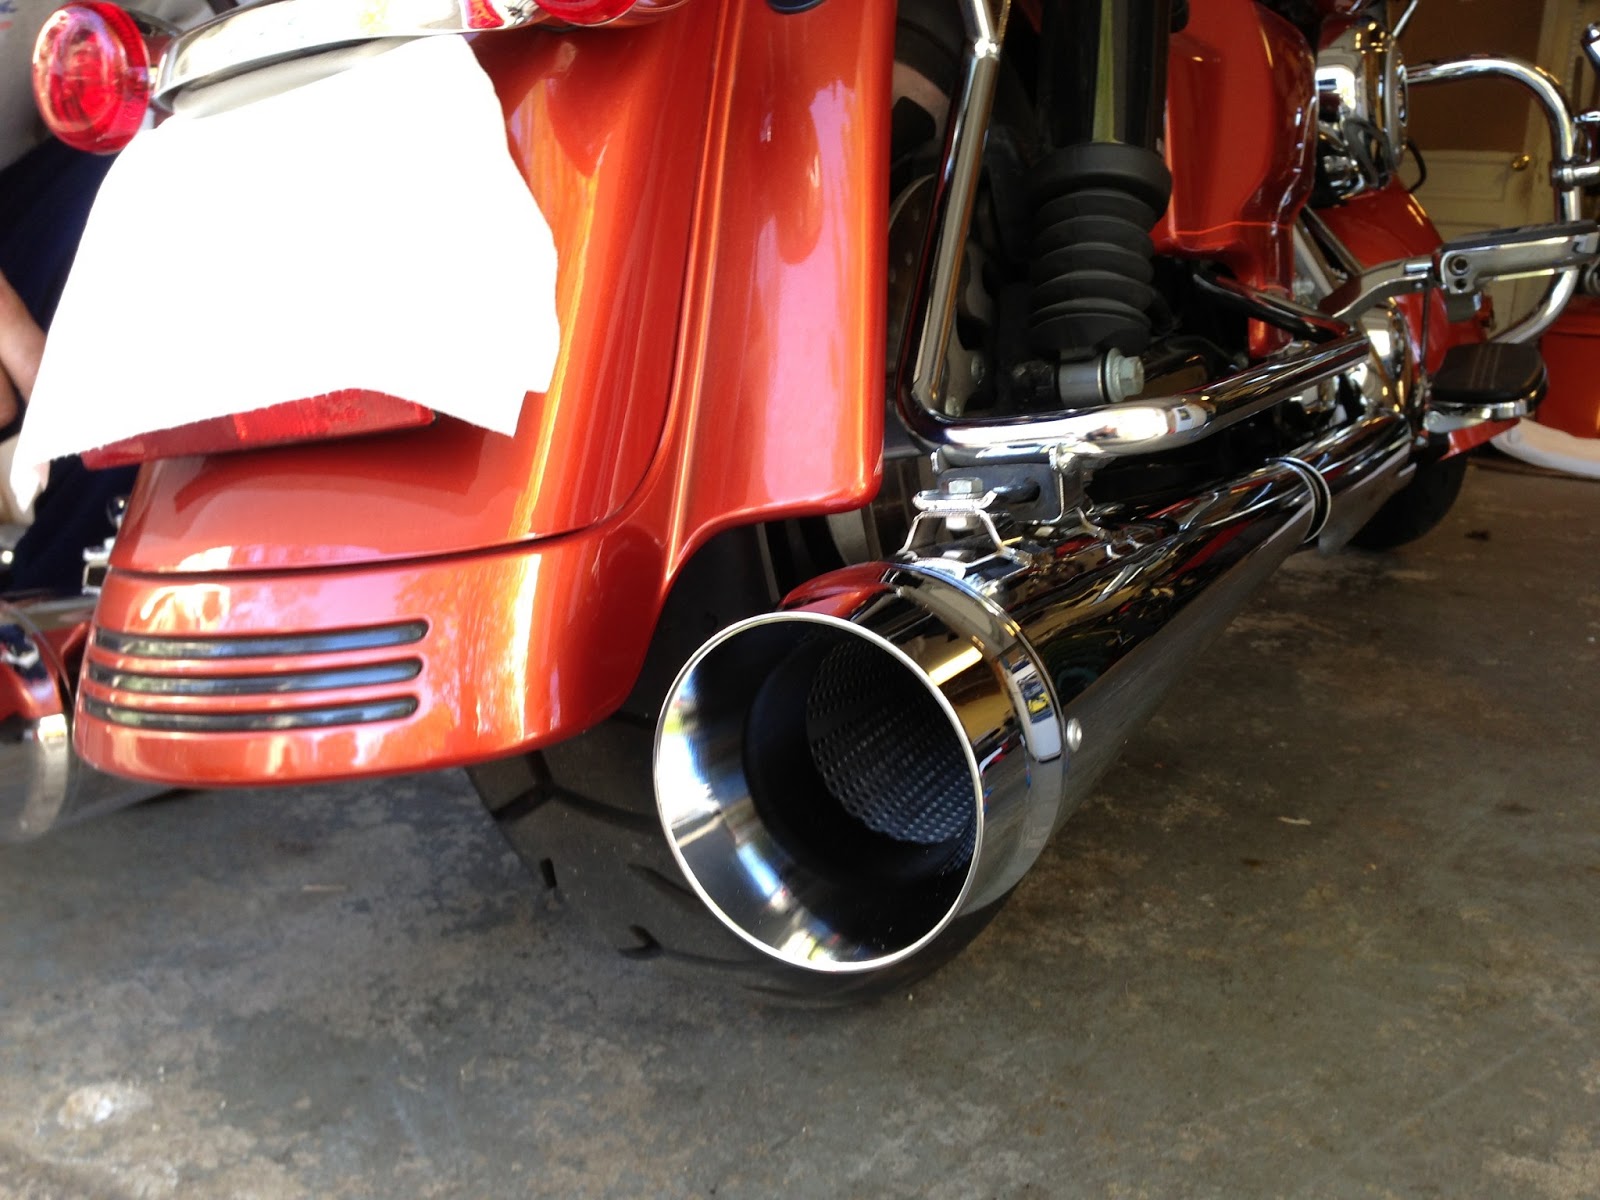 The Kickstand Chronicles: CFR Knockoff Exhaust